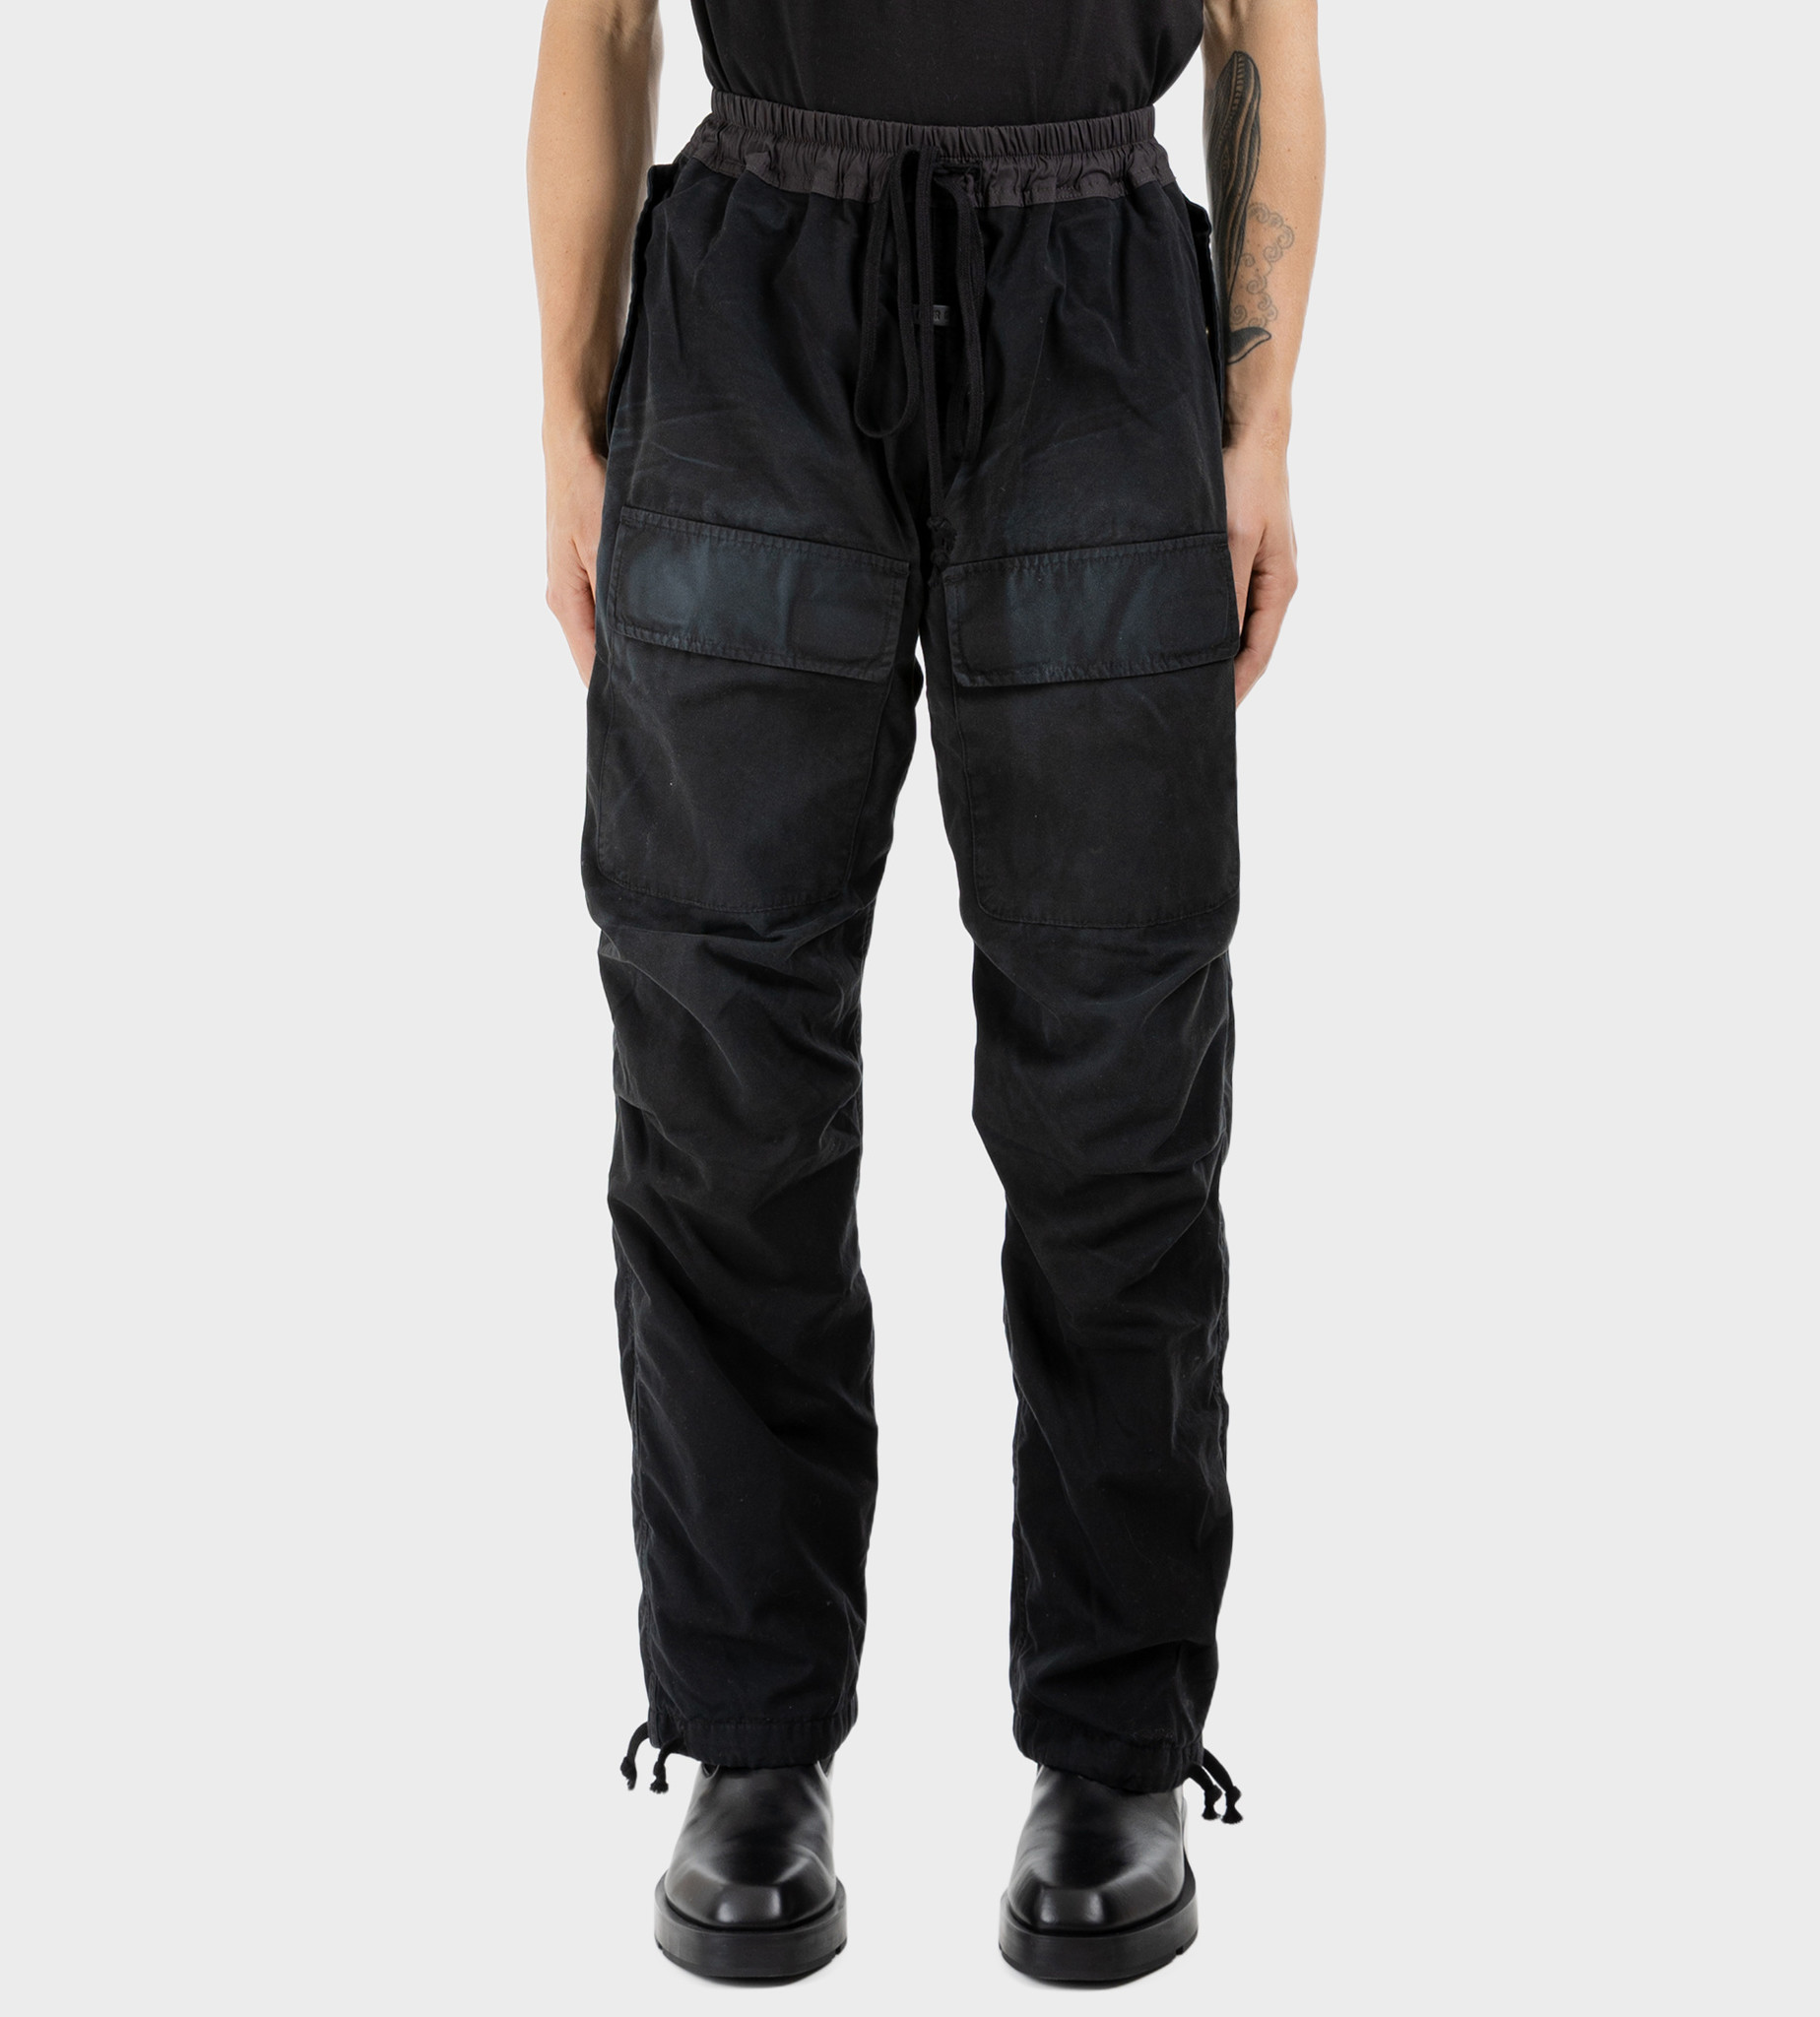 FEAR OF GOD Leather-Trimmed Cotton Trousers Black